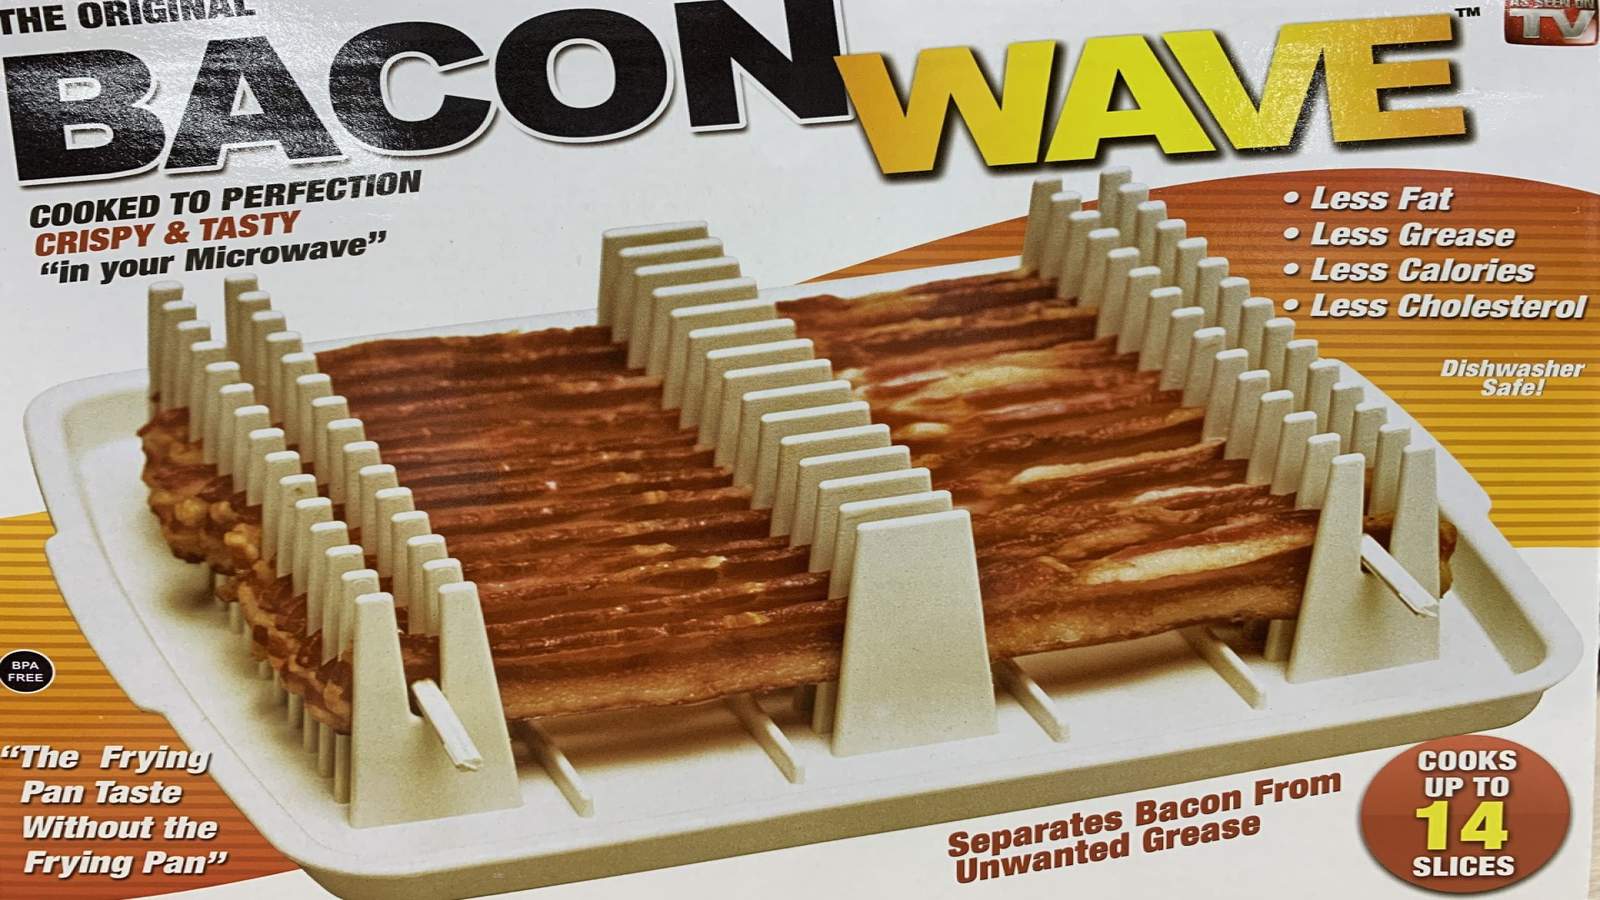 Deal or Dud: Bacon Wave